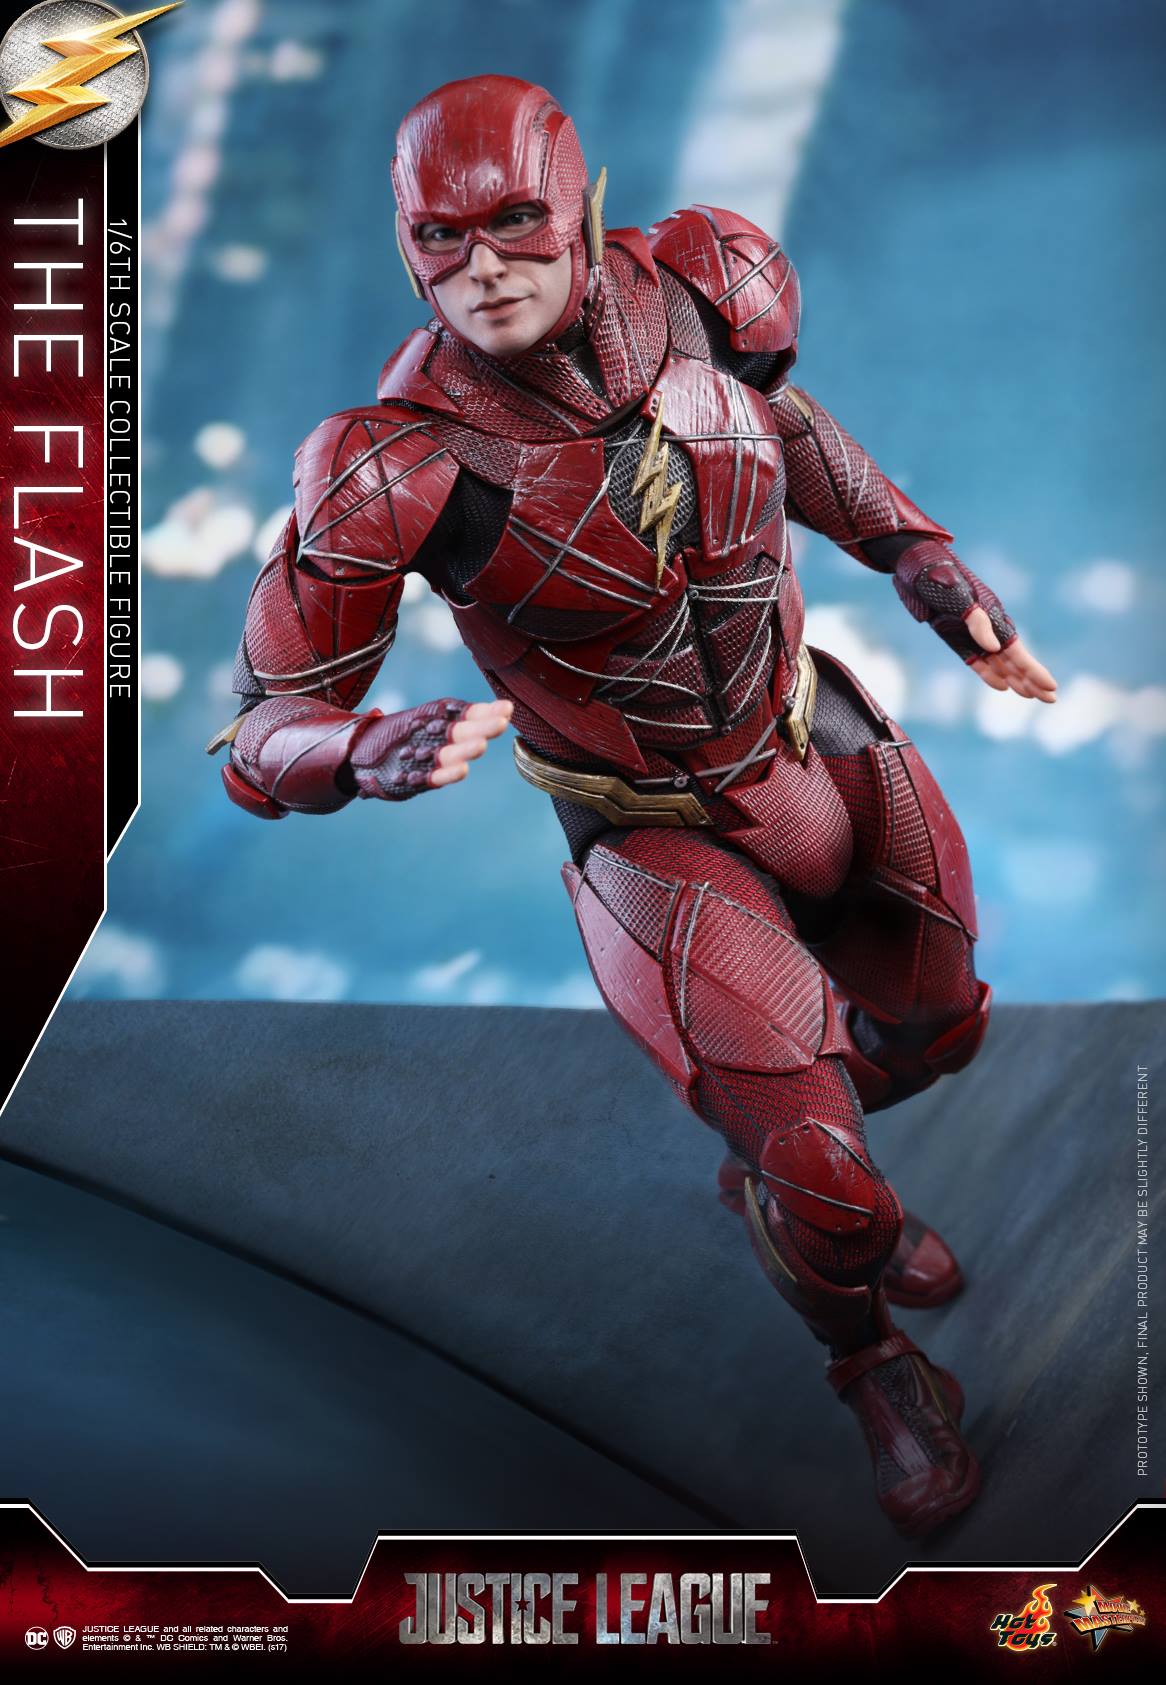 Hot_Toys_Justice_League_The_Flash_008.jpg